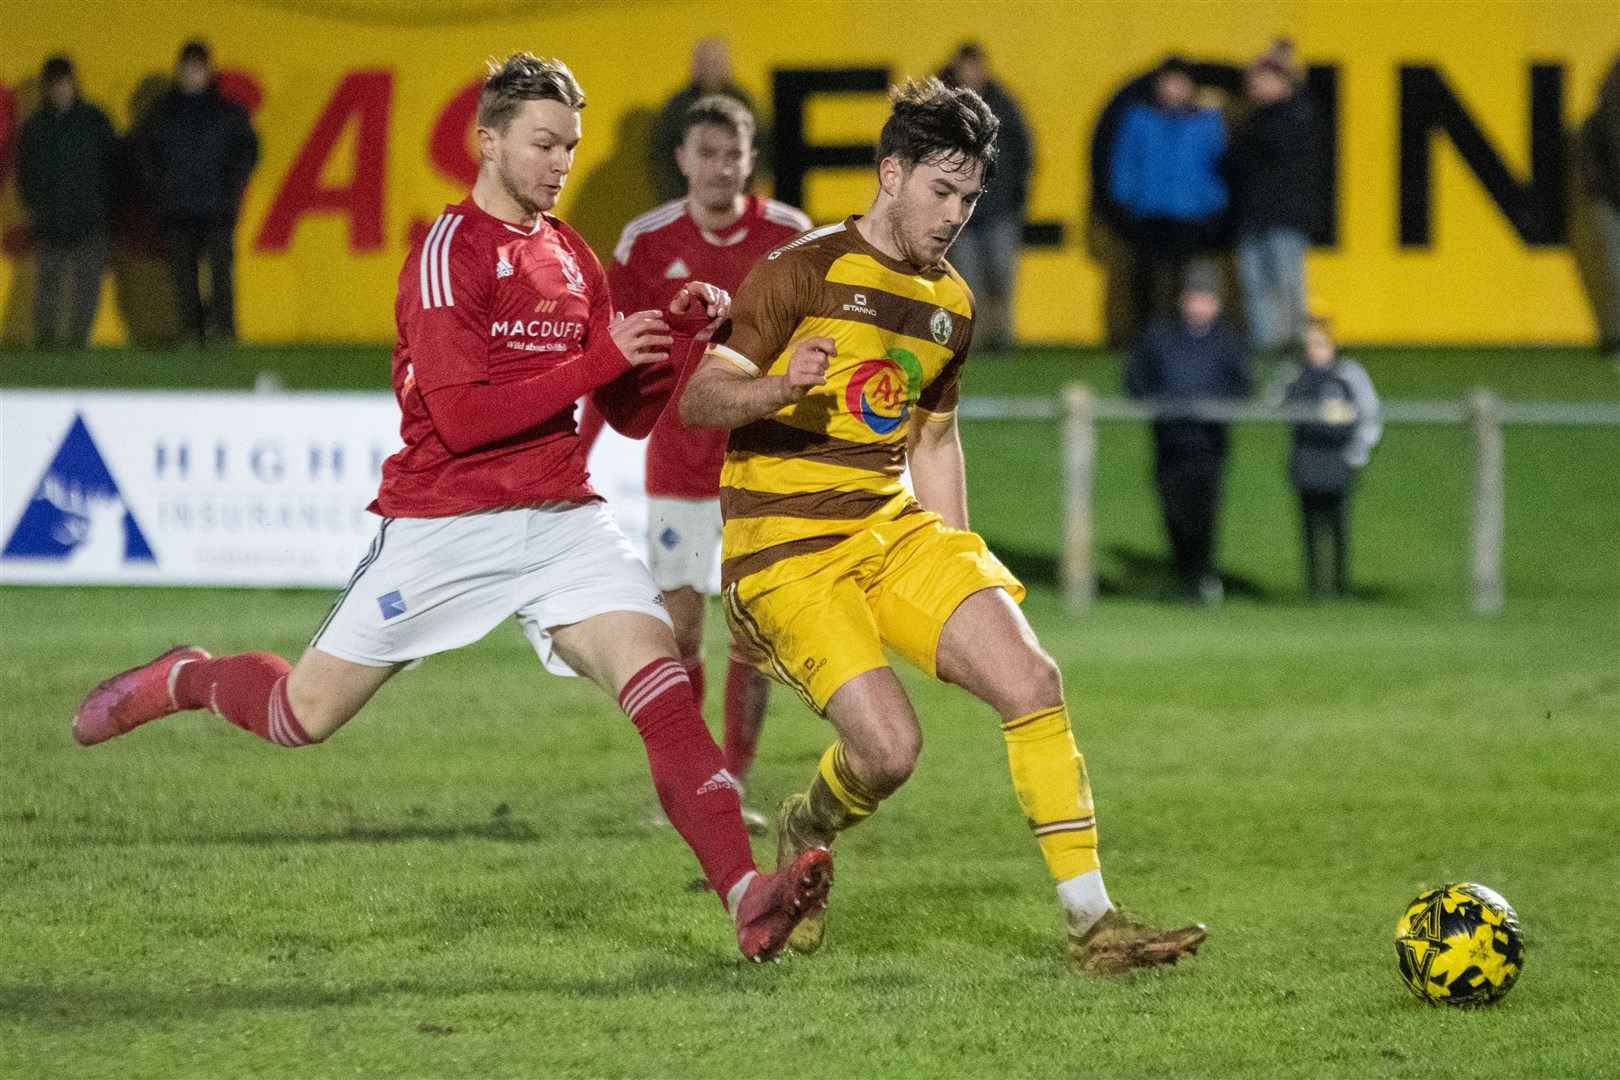 Vale's Rogan Reed moves in to win the ball from Forres' Thomas Brady...Forres Mechanics FC (0) vs Deveronvale FC (2) - Highland Football League 23/24 - Mosset Park, Forres 13/01/2024...Picture: Daniel Forsyth..